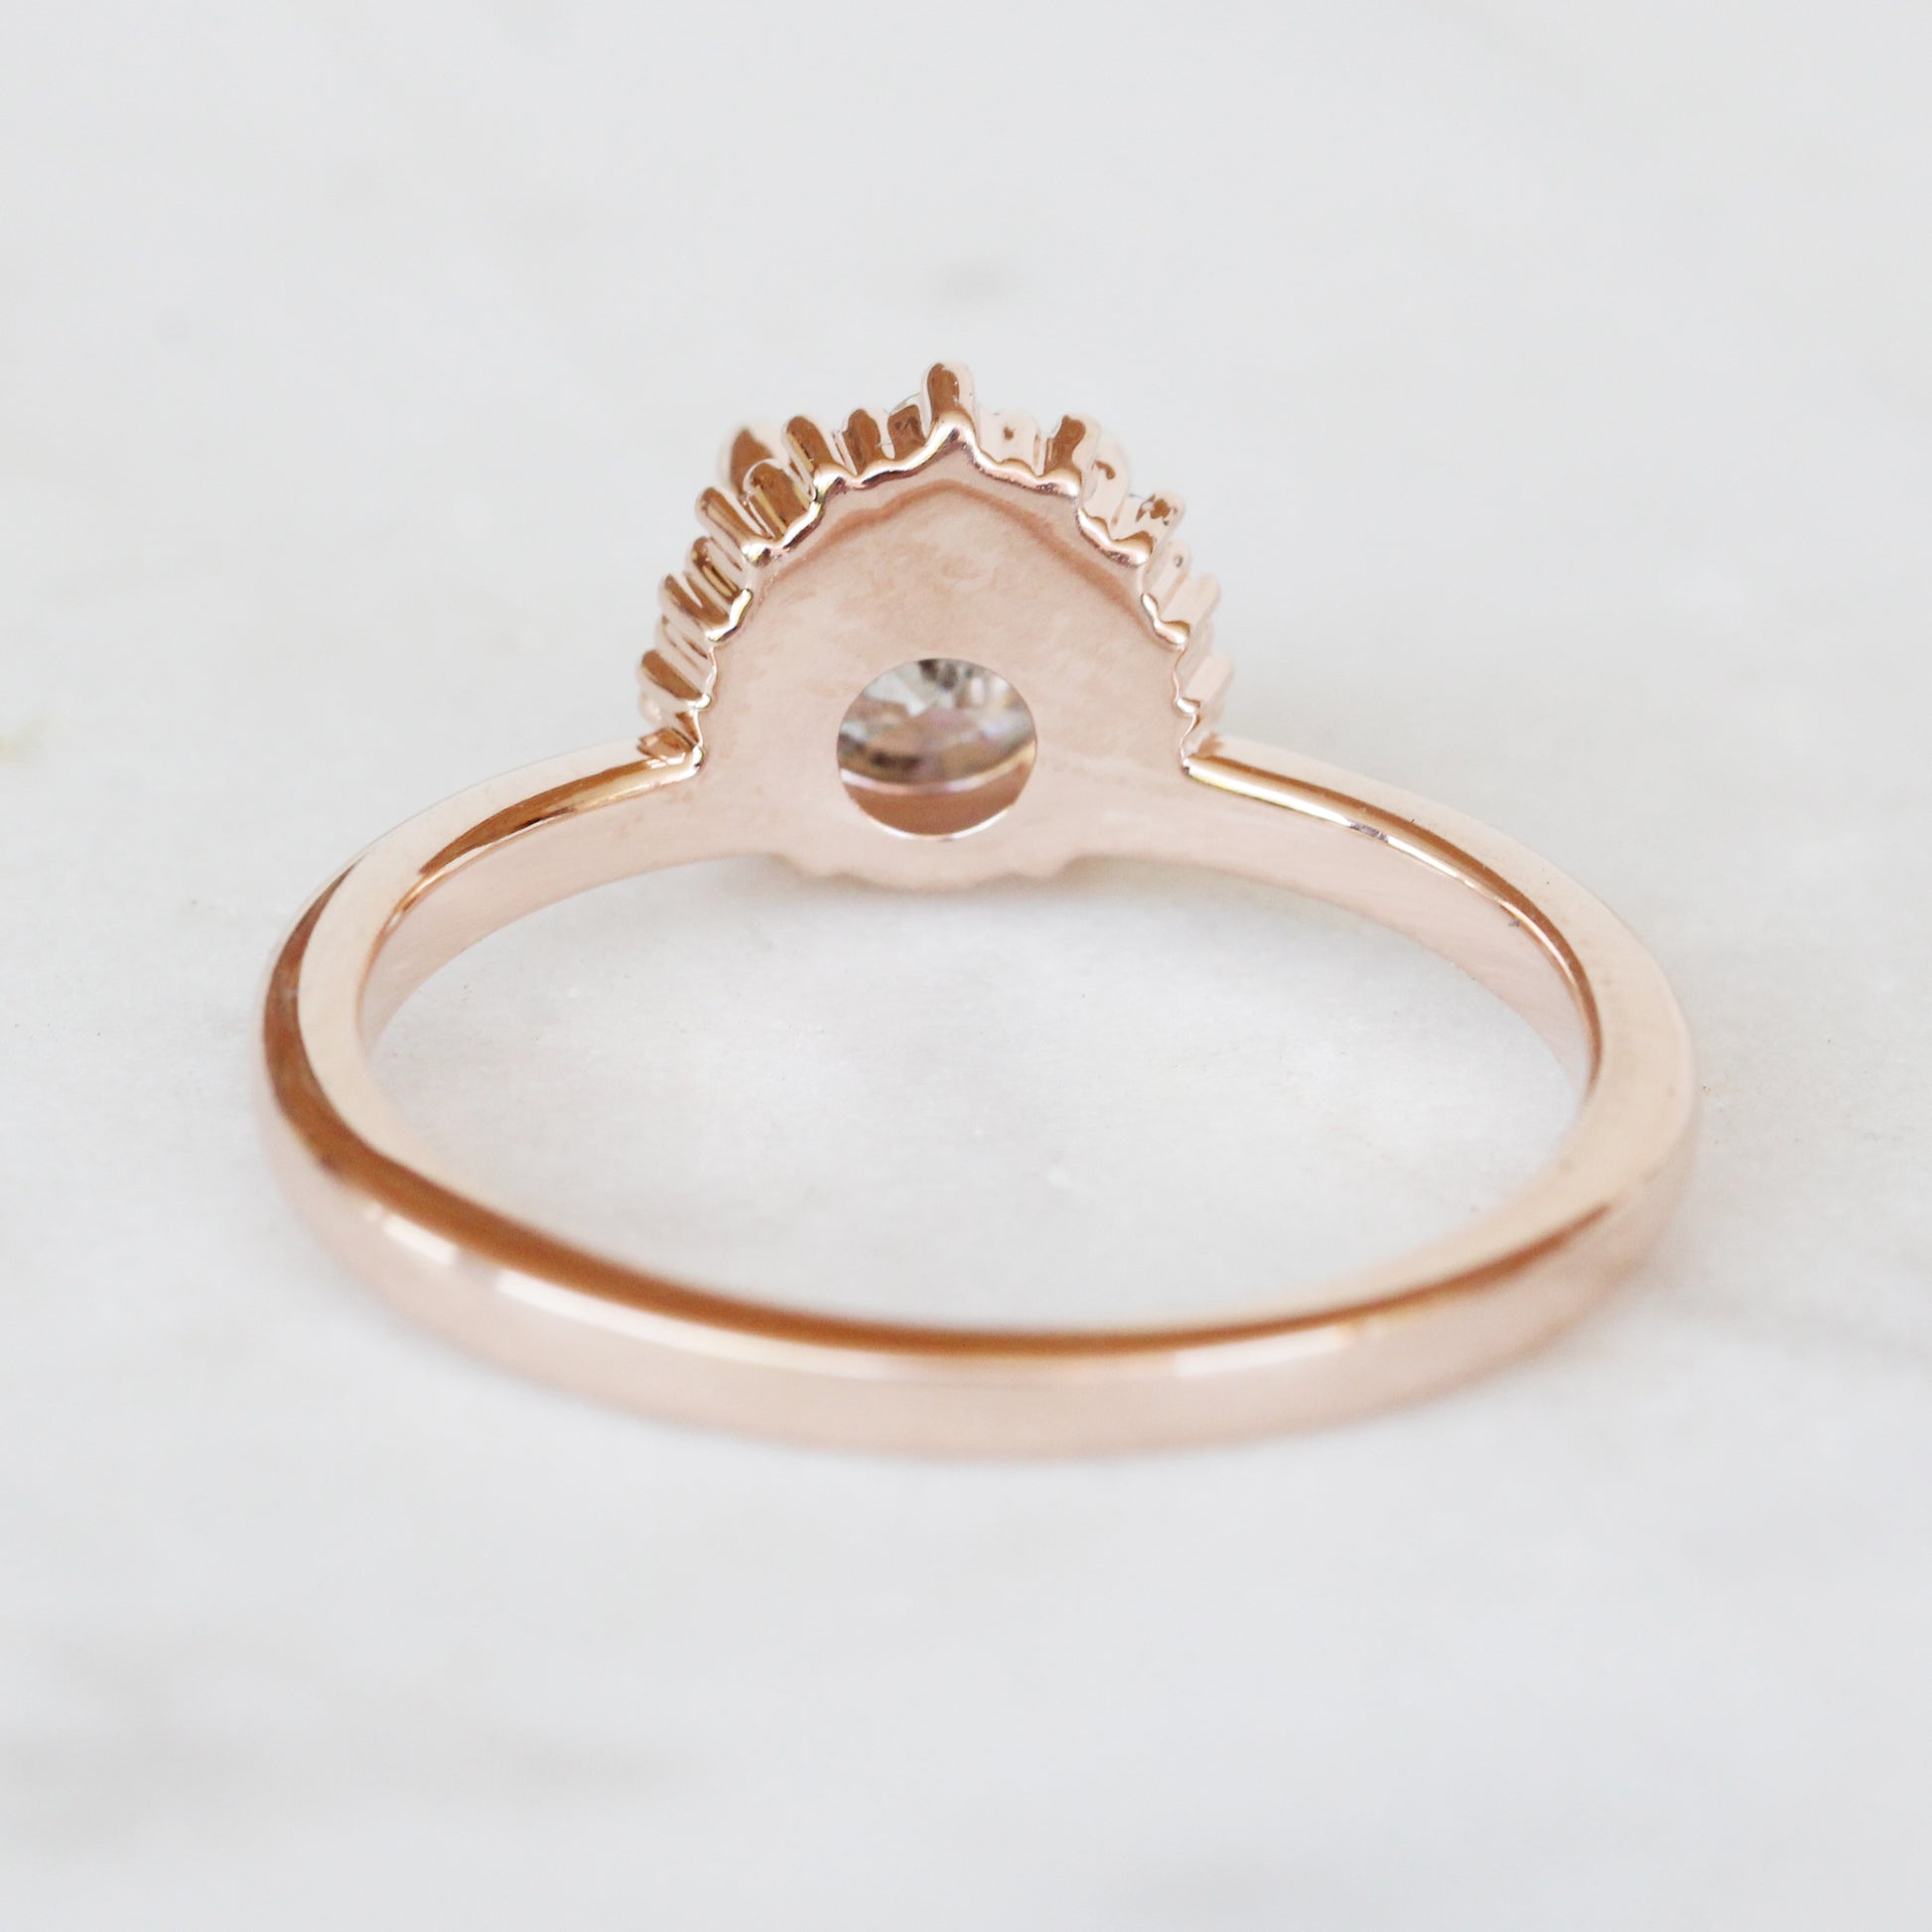 Lonnie Ring with a 1.01 Carat Round Celestial Diamond in 10k Rose Gold - Ready to Size and Ship - Midwinter Co. Alternative Bridal Rings and Modern Fine Jewelry